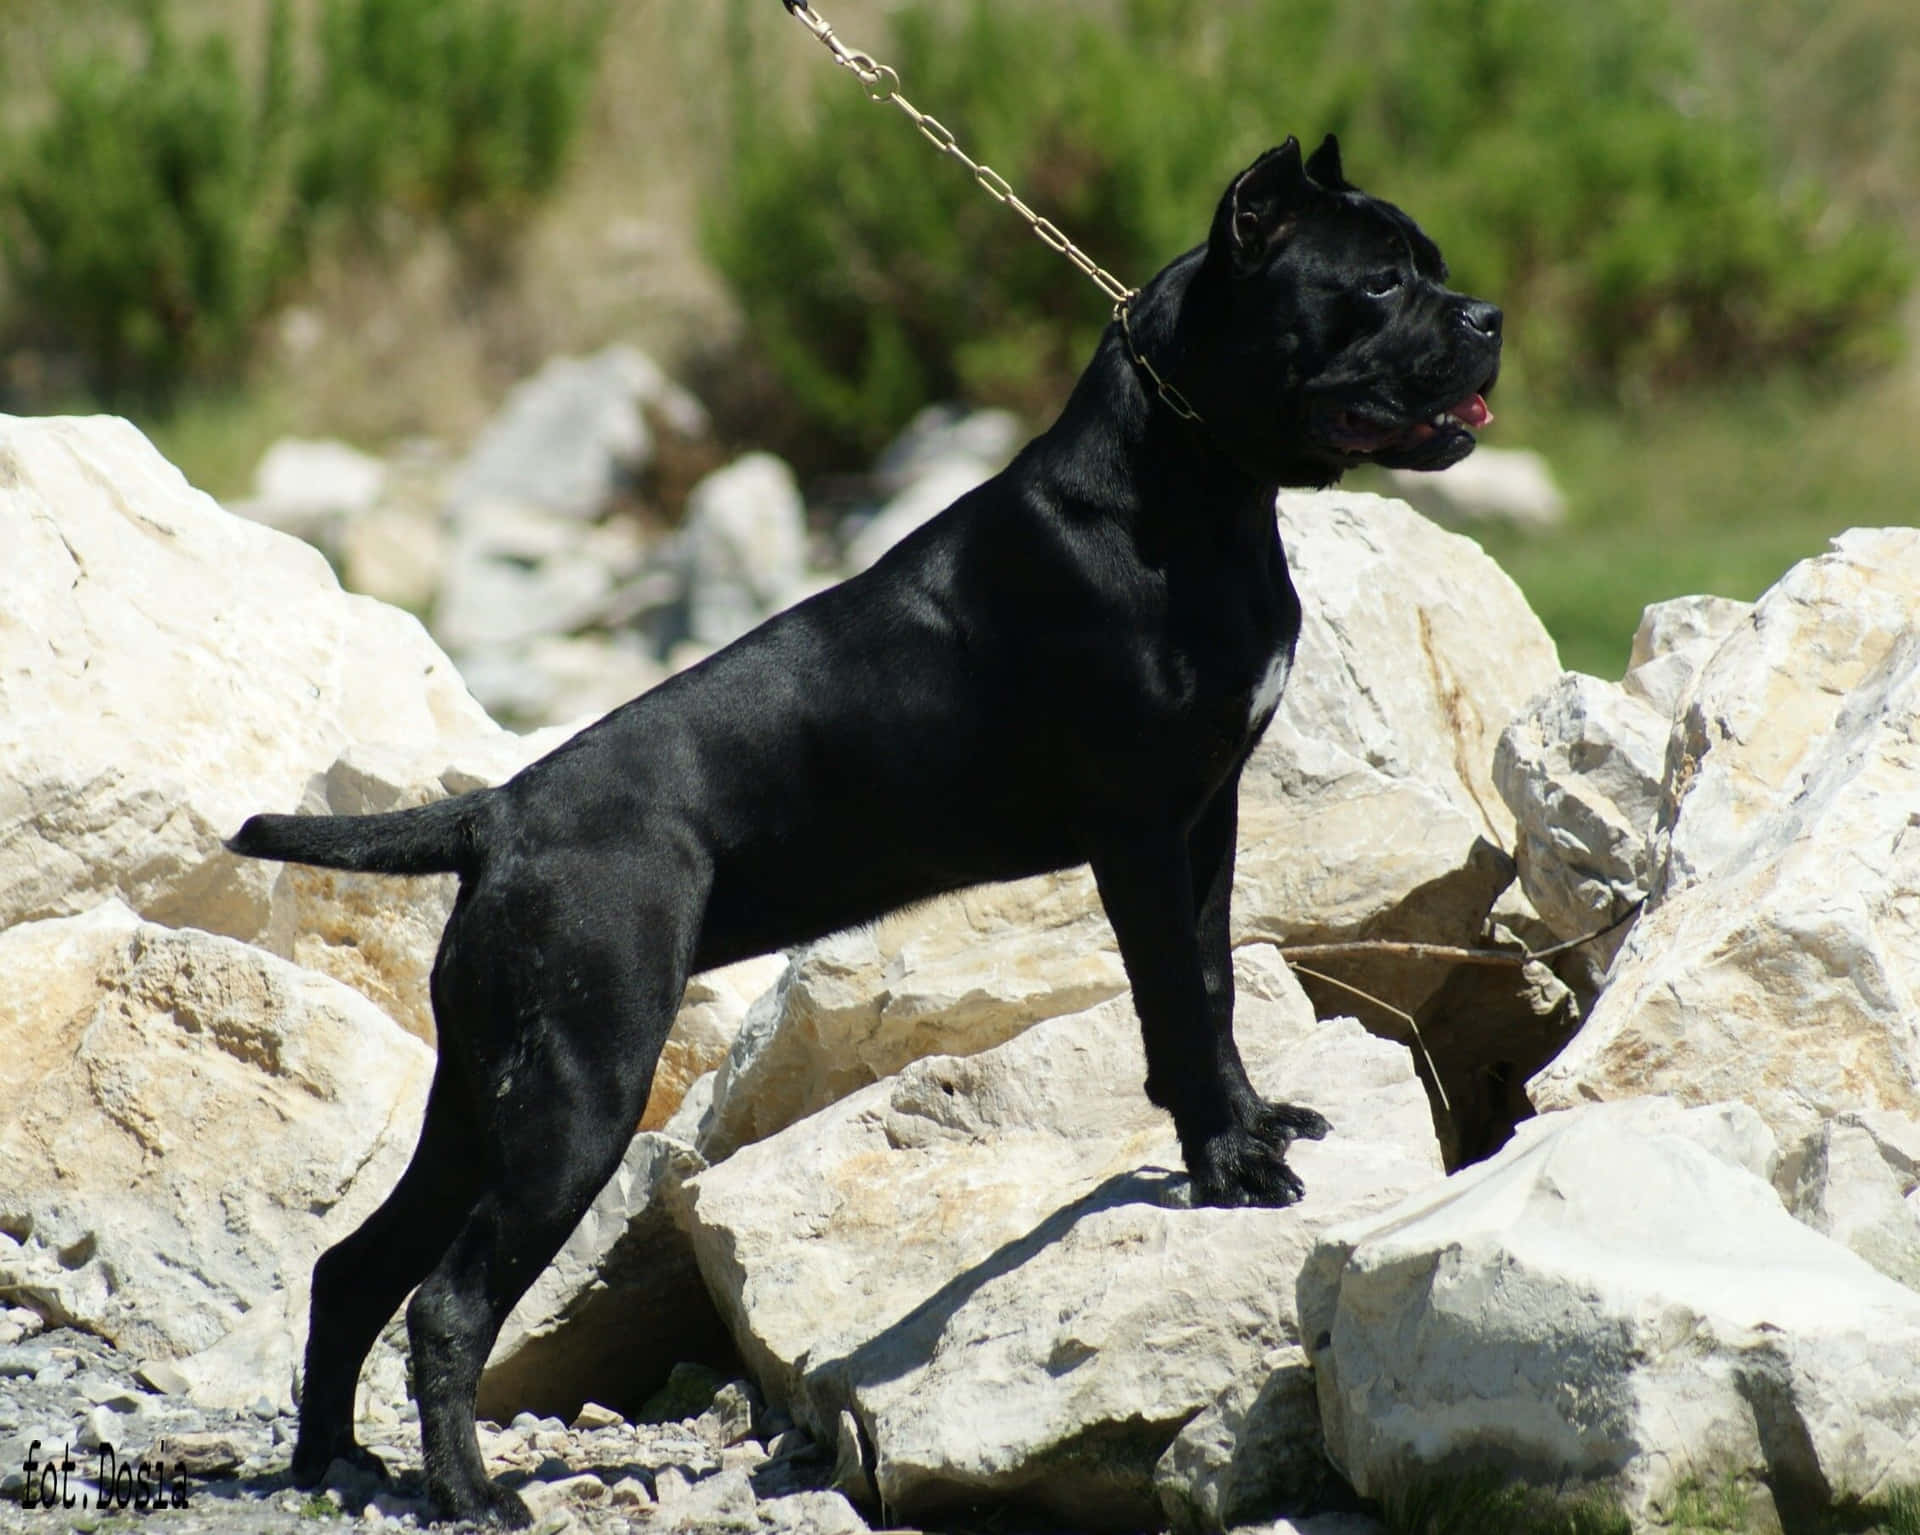 "Majestic and powerful - the Cane Corso"